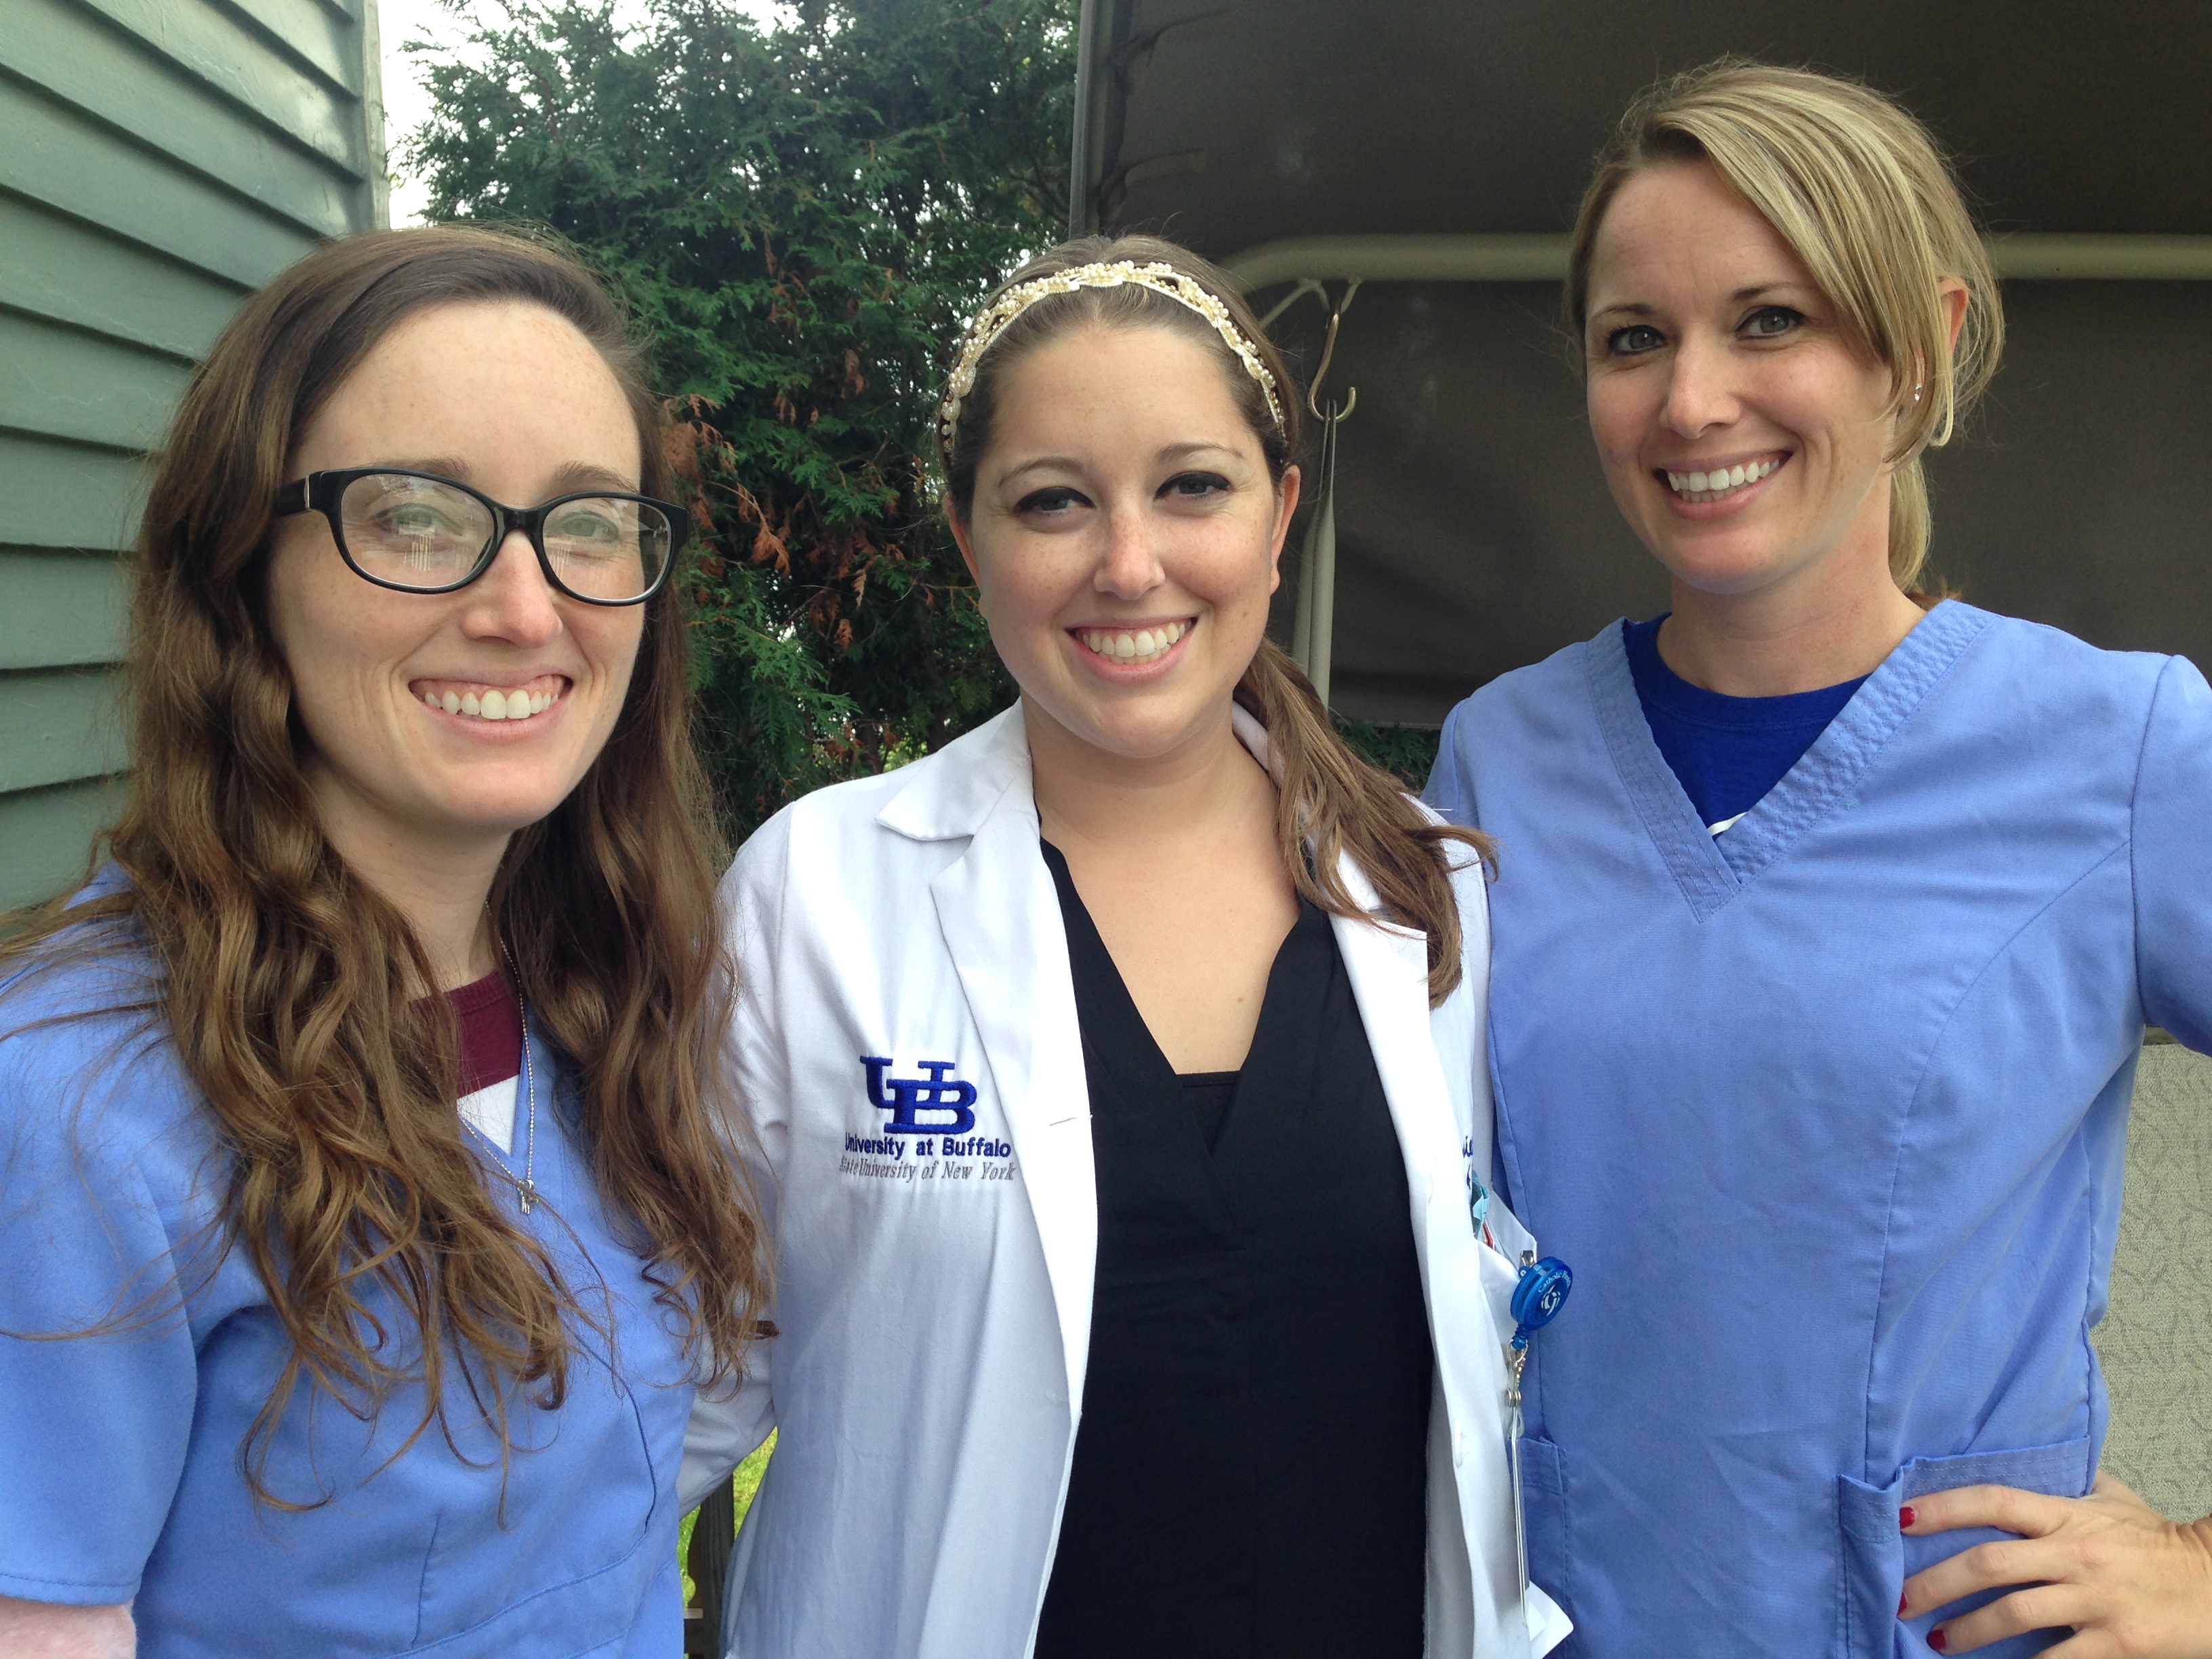 Mount Mercy’s Wierchowski sisters, now all doctors, tell how school prepared them